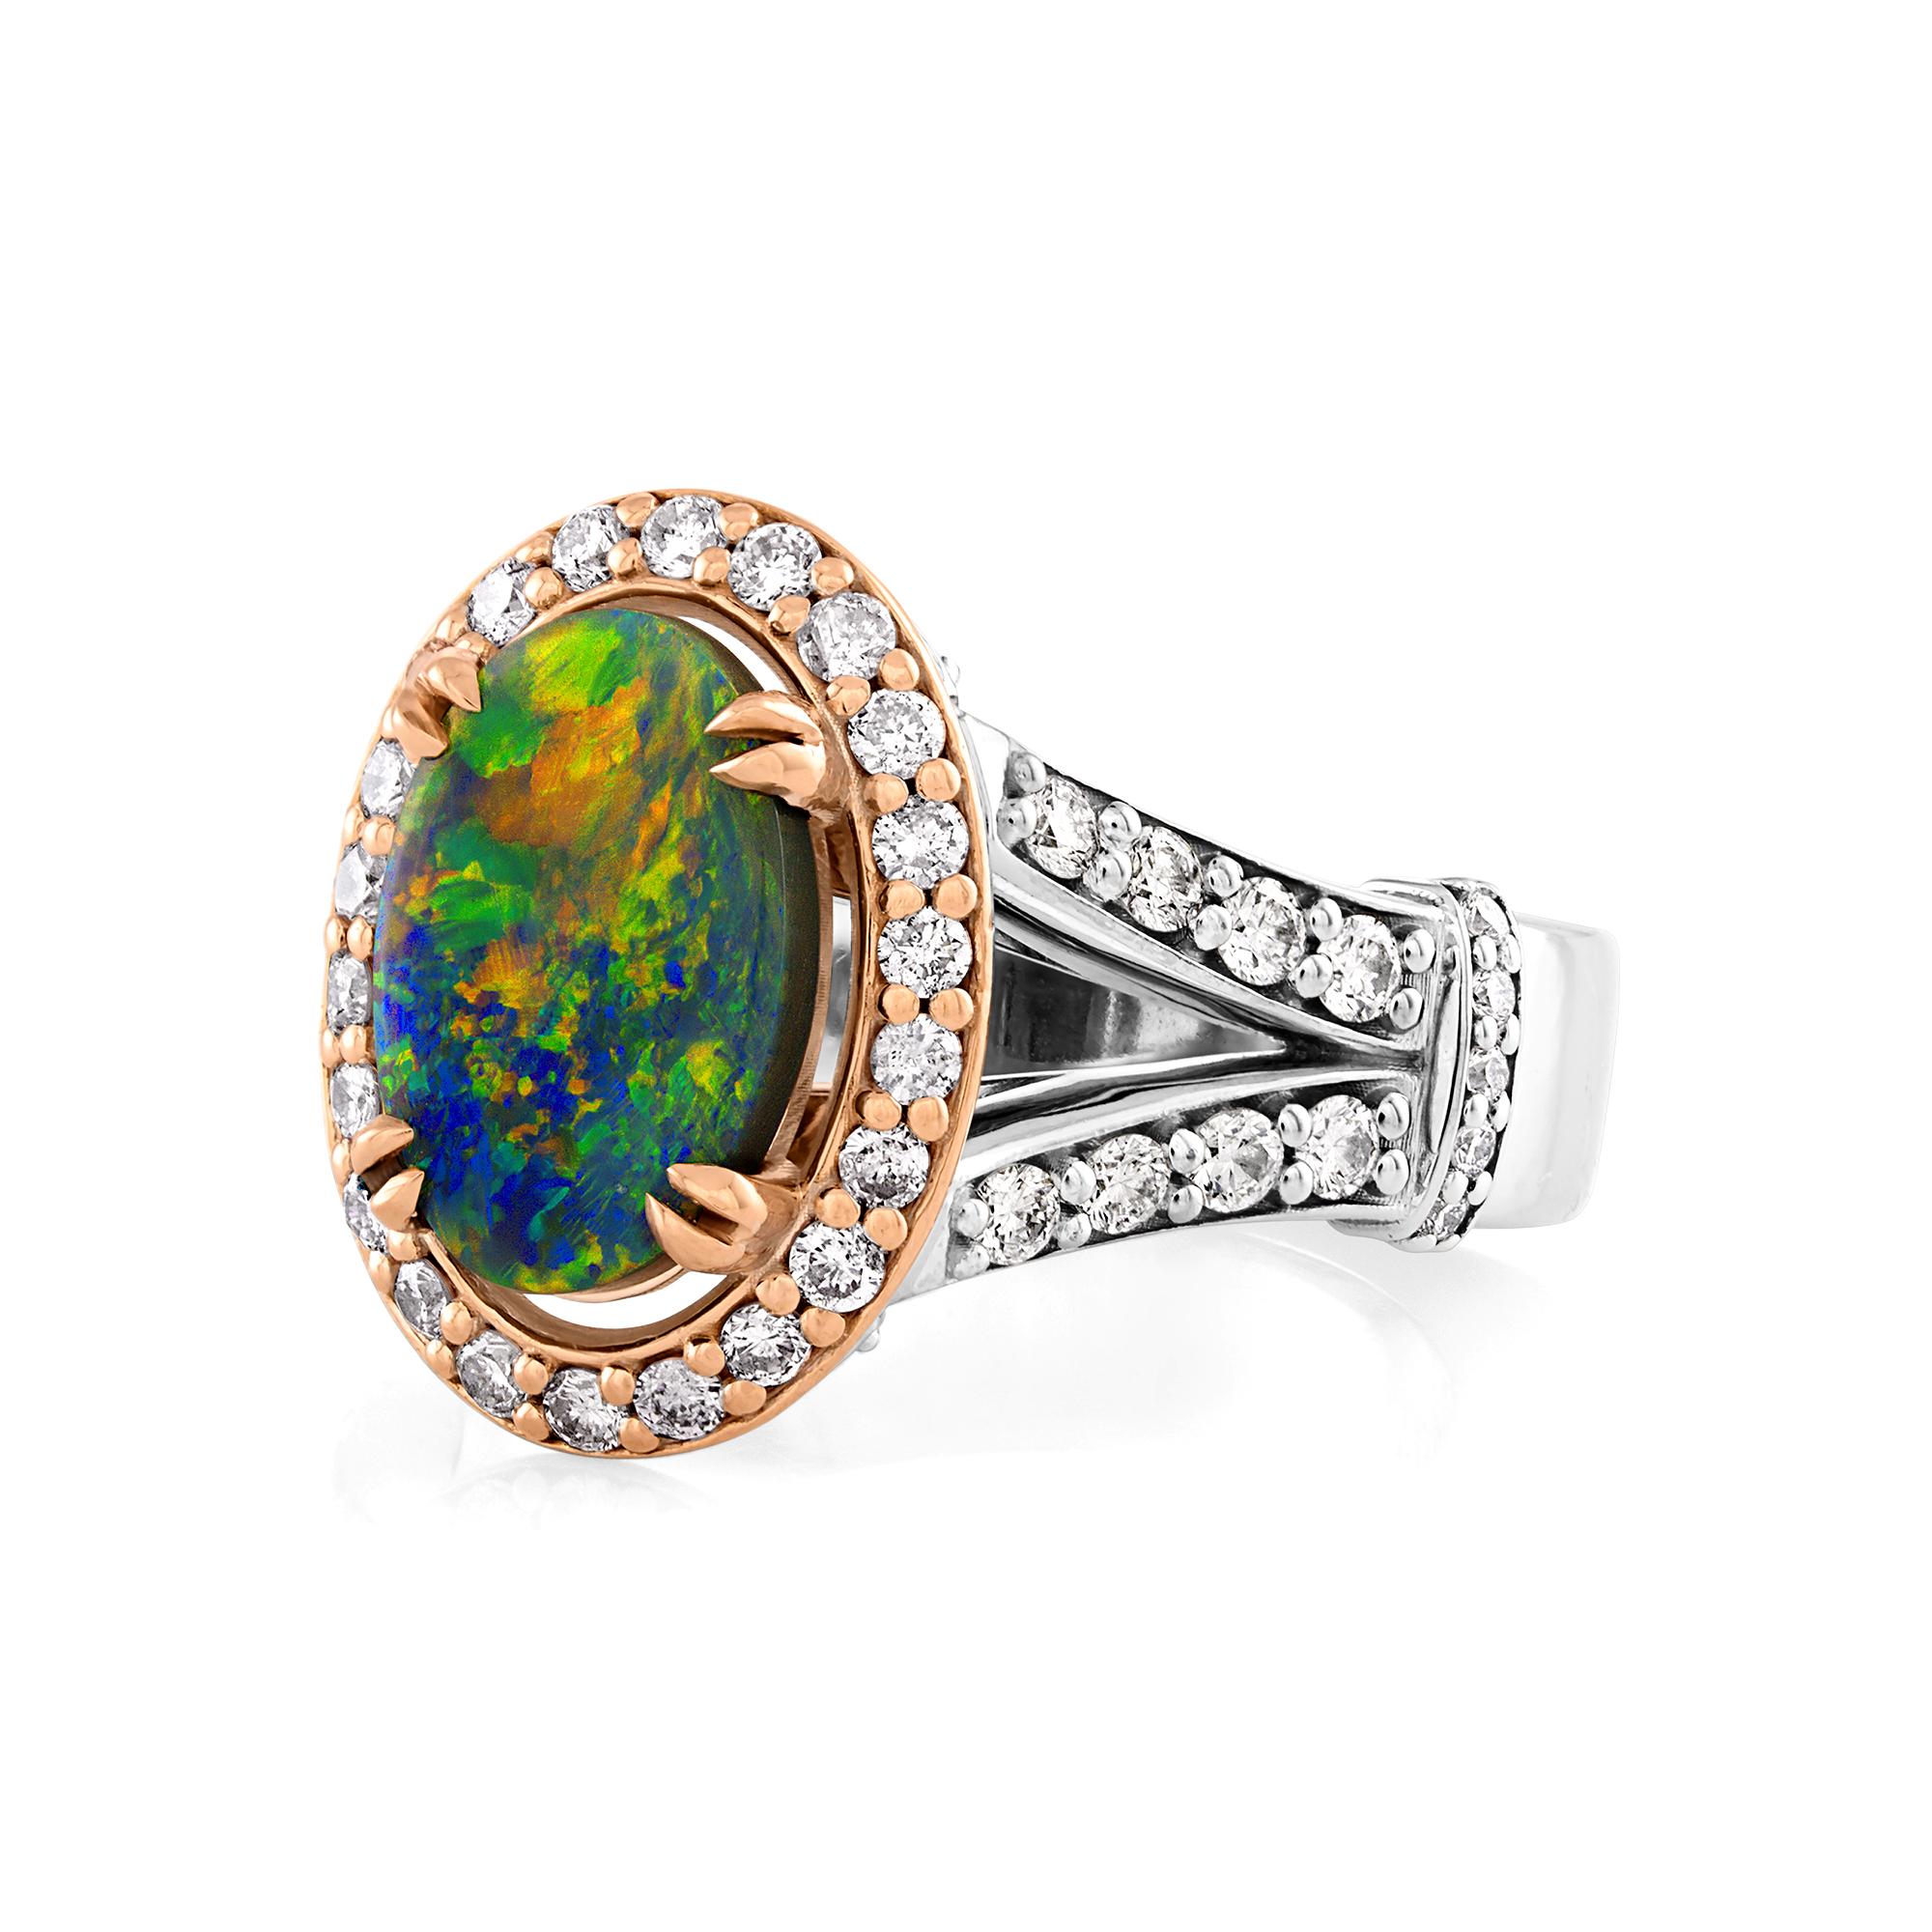 STUNNING RICH MULTI COLOR, FIREY Australian Black Opal Ring from the Lighting Ridge Mine, Pink & White Diamonds and Ruby 14k Gold Ring.

Highly collectible the Center Opal is 1.33ct, measures 11 x 7 x 2mm. Body Tone 2N, Brilliance 4 on the scale 1